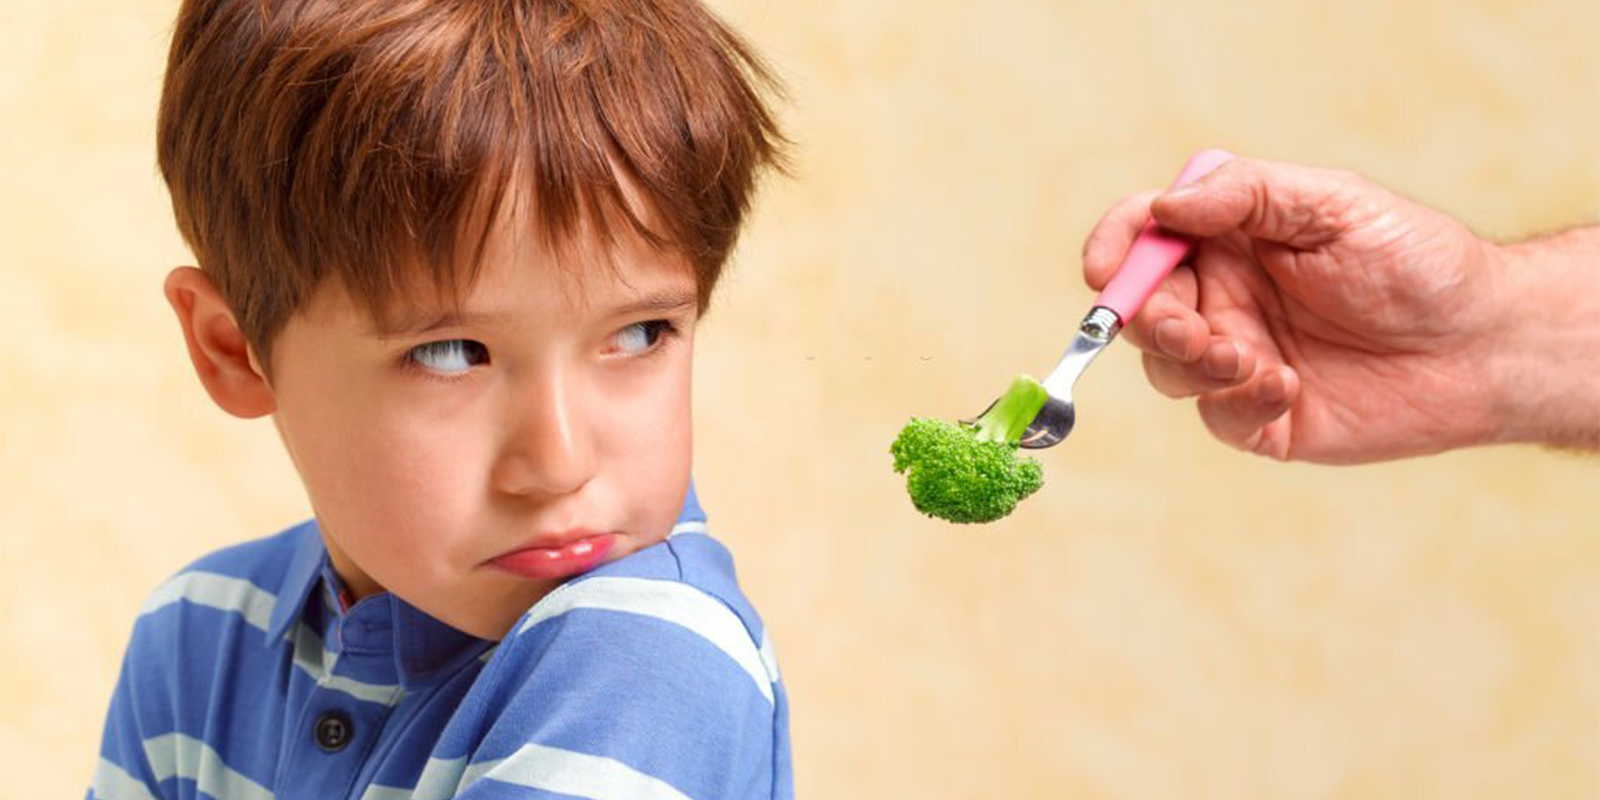 Nutritious Diet Is Linked To Mental Well-Being In Children